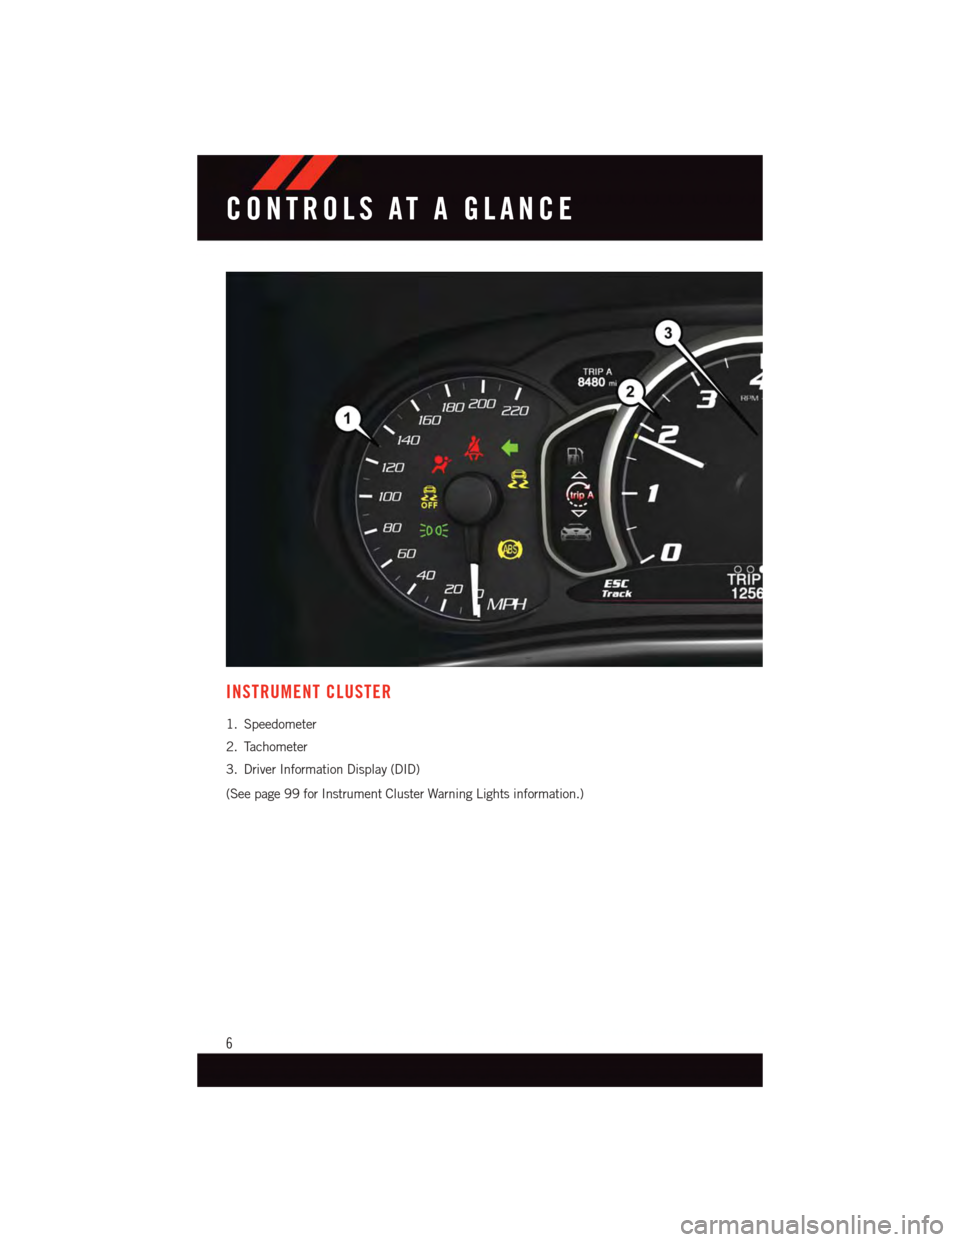 DODGE VIPER 2015 VX / 3.G User Guide INSTRUMENT CLUSTER
1. Speedometer
2. Tachometer
3. Driver Information Display (DID)
(See page 99 for Instrument Cluster Warning Lights information.)
CONTROLS AT A GLANCE
6 